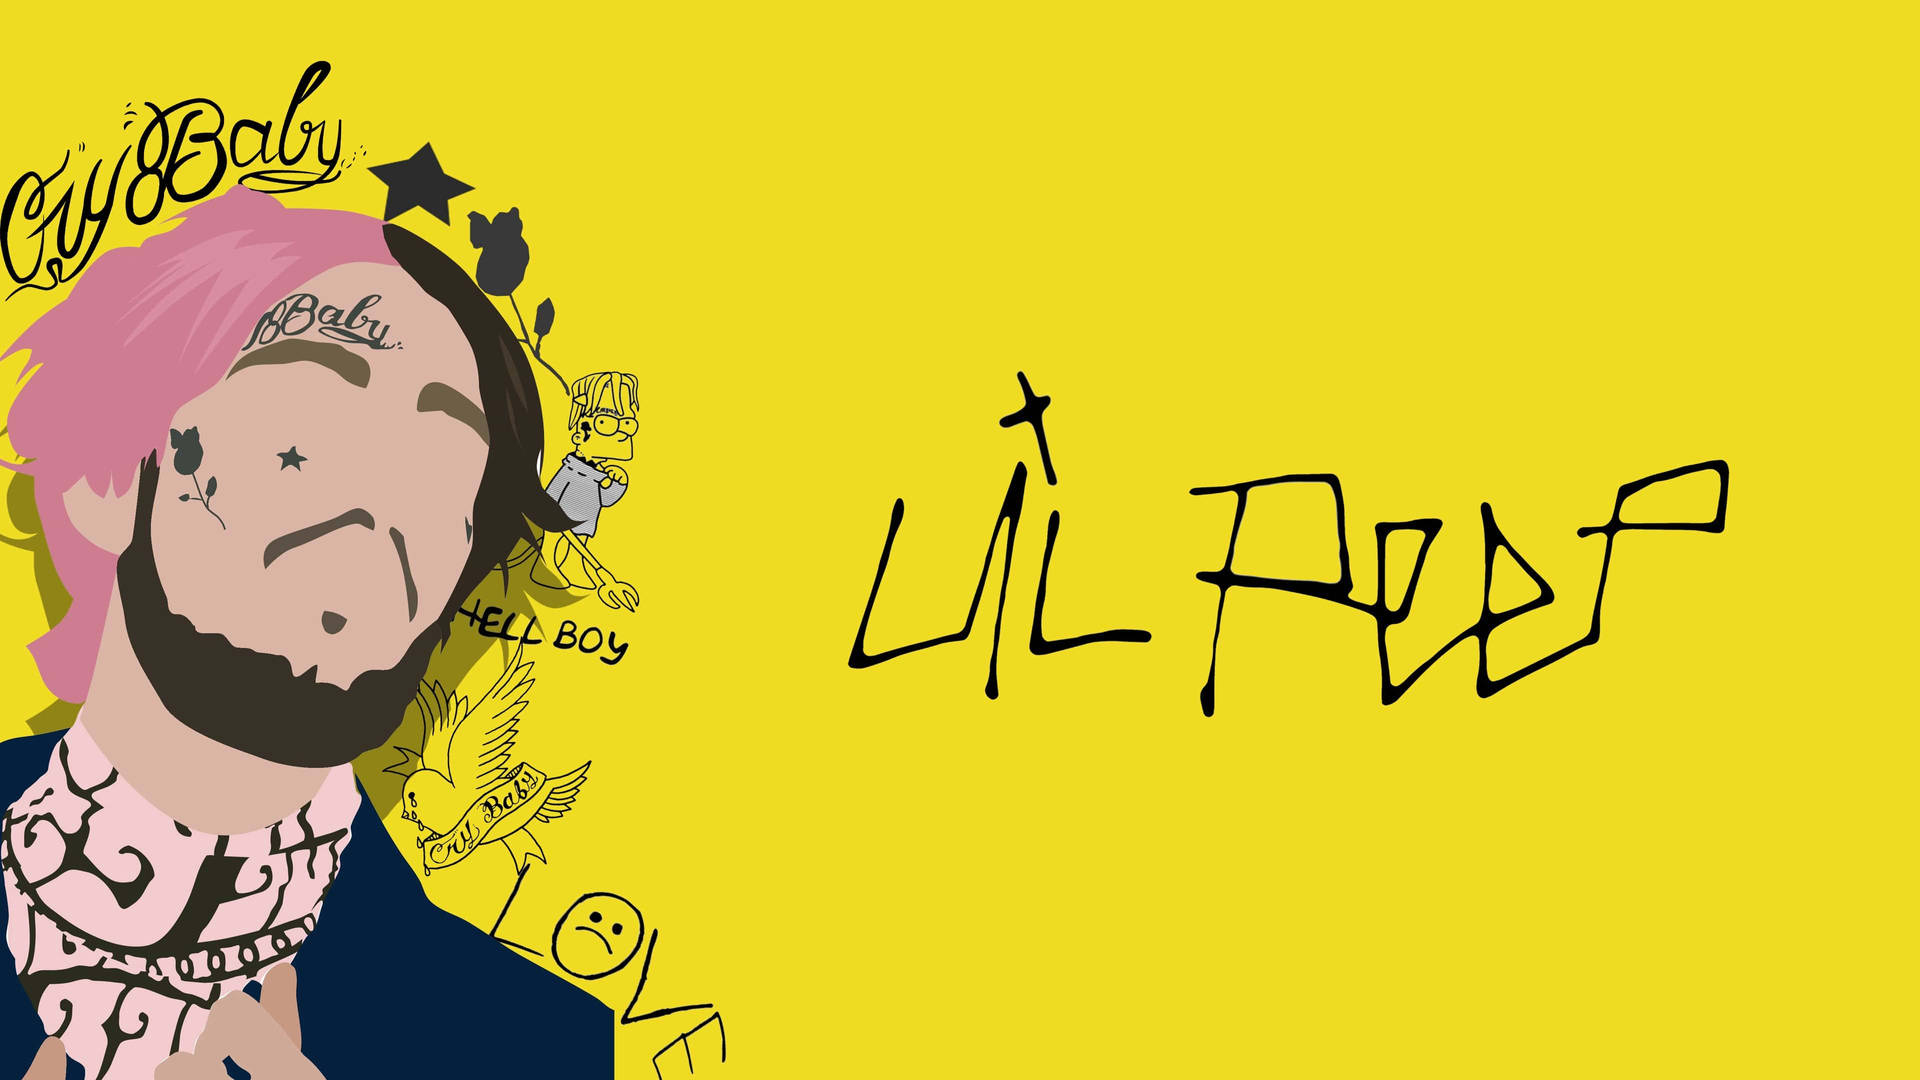 The Late Lil Peep In His Iconic Yellow Artwork Wallpaper